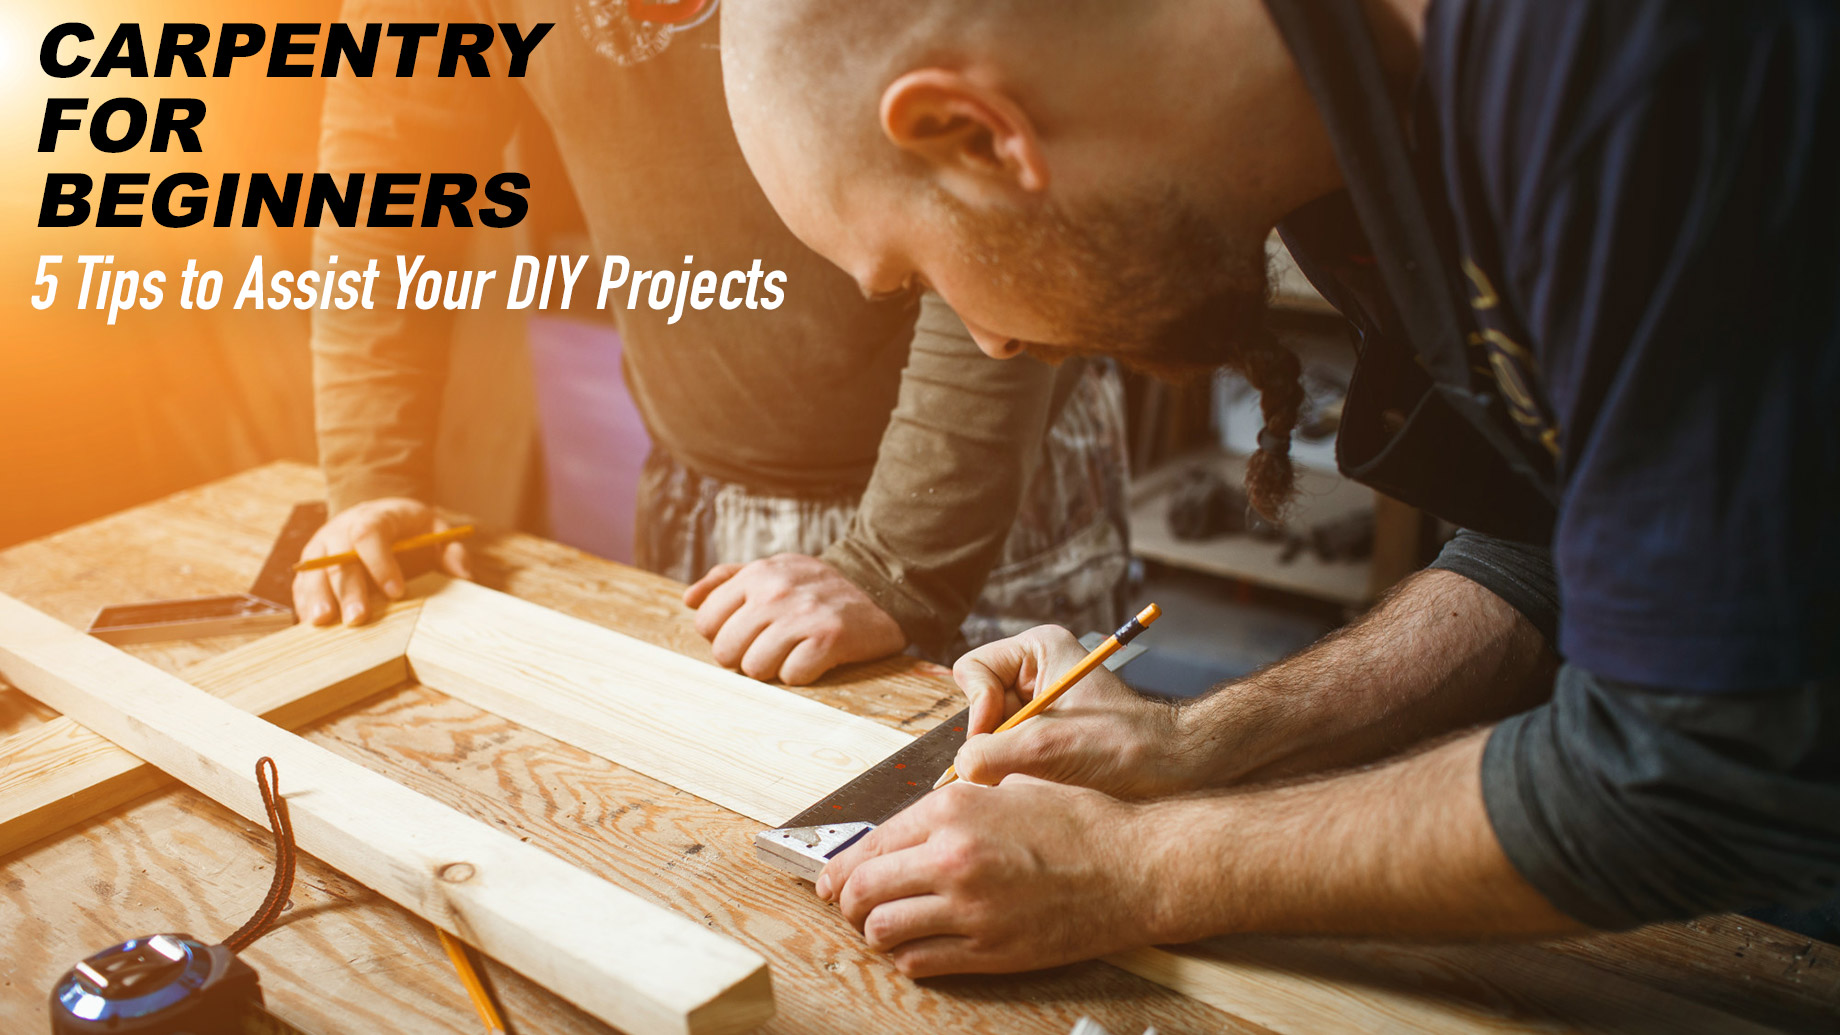 Carpentry for Beginners - 5 Tips to Assist Your DIY Projects